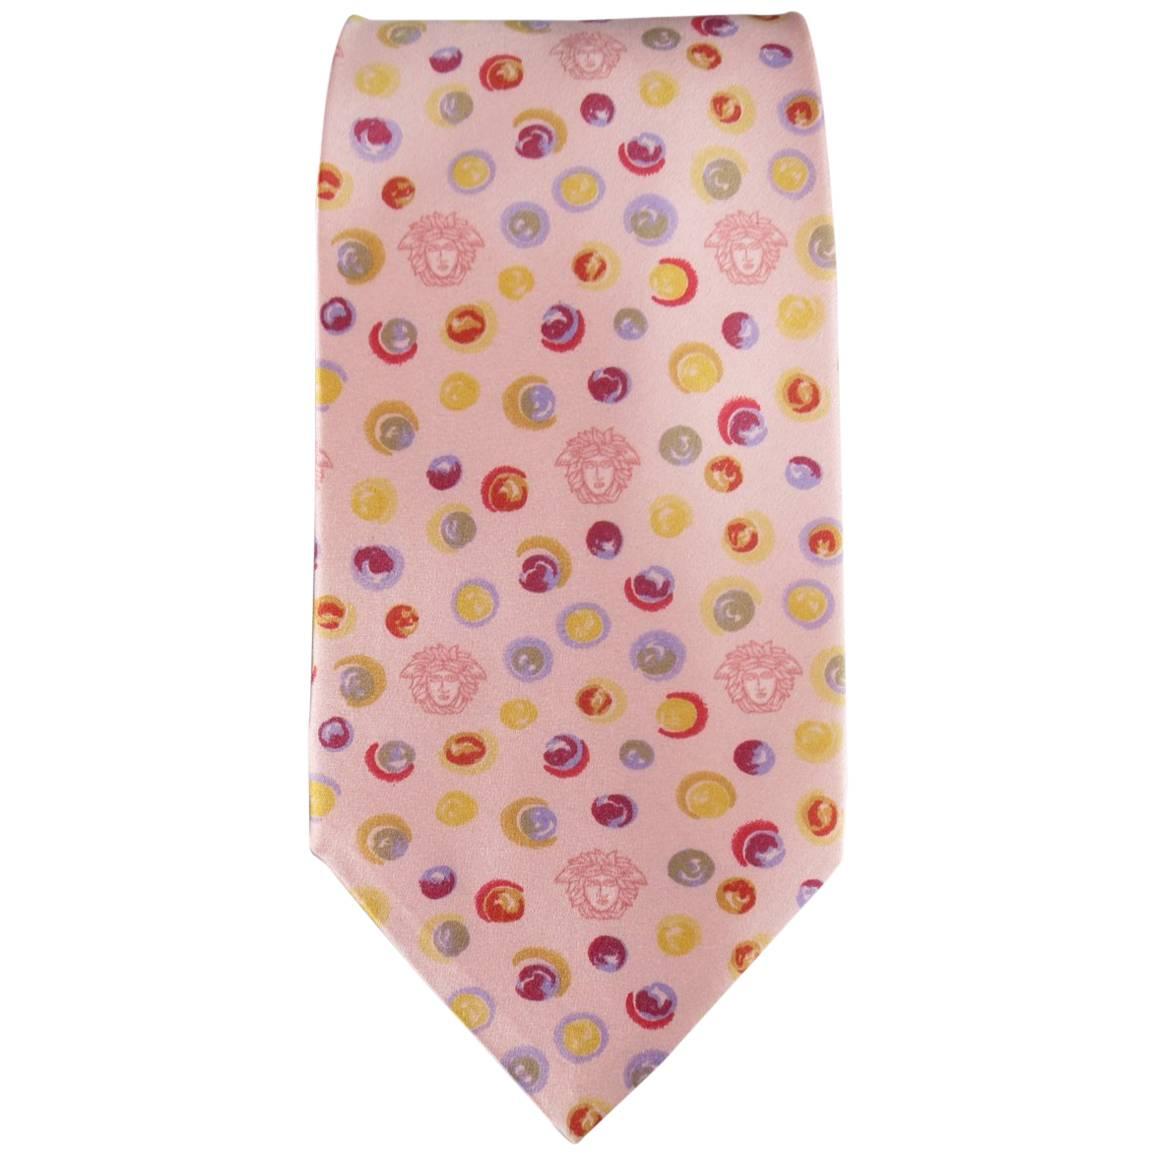 GIANNI VERSACE Vintage Tie consists of 100% silk material in a pink color tone. 